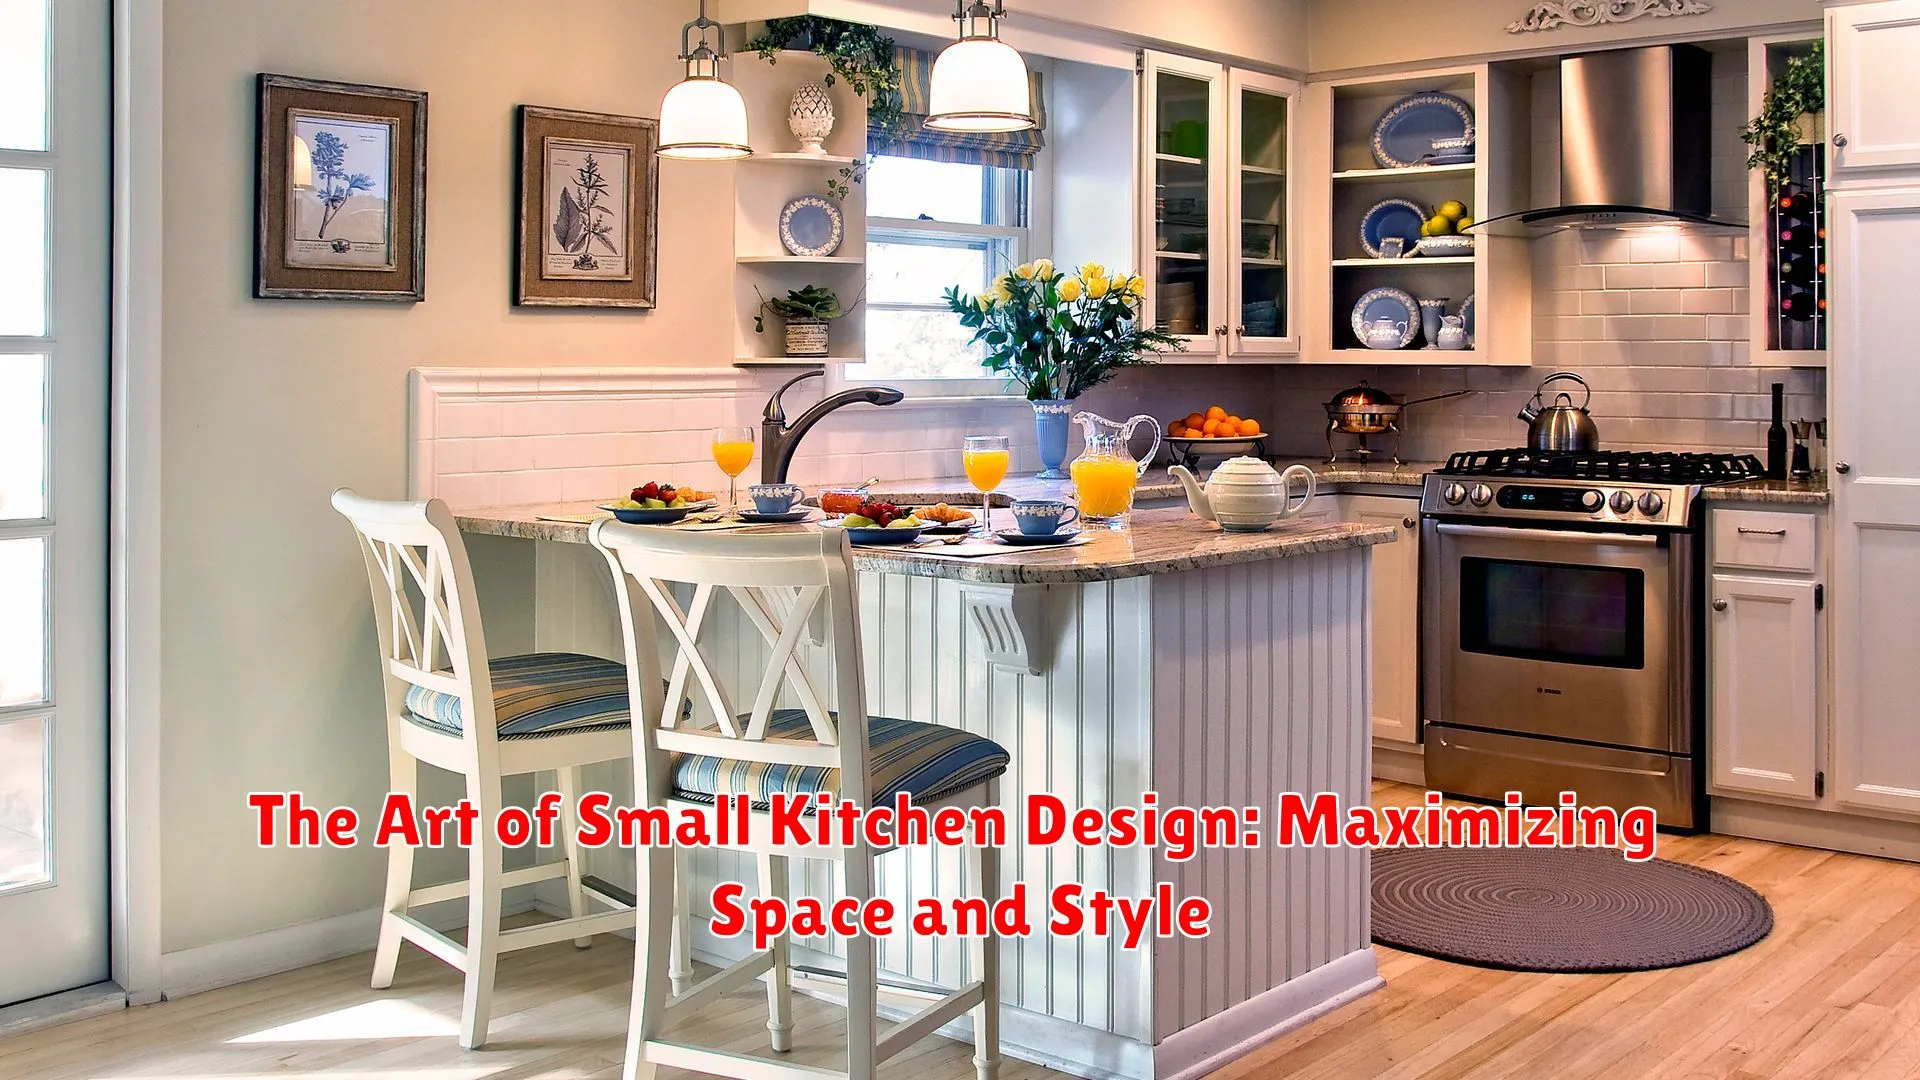 The Art of Small Kitchen Design: Maximizing Space and Style